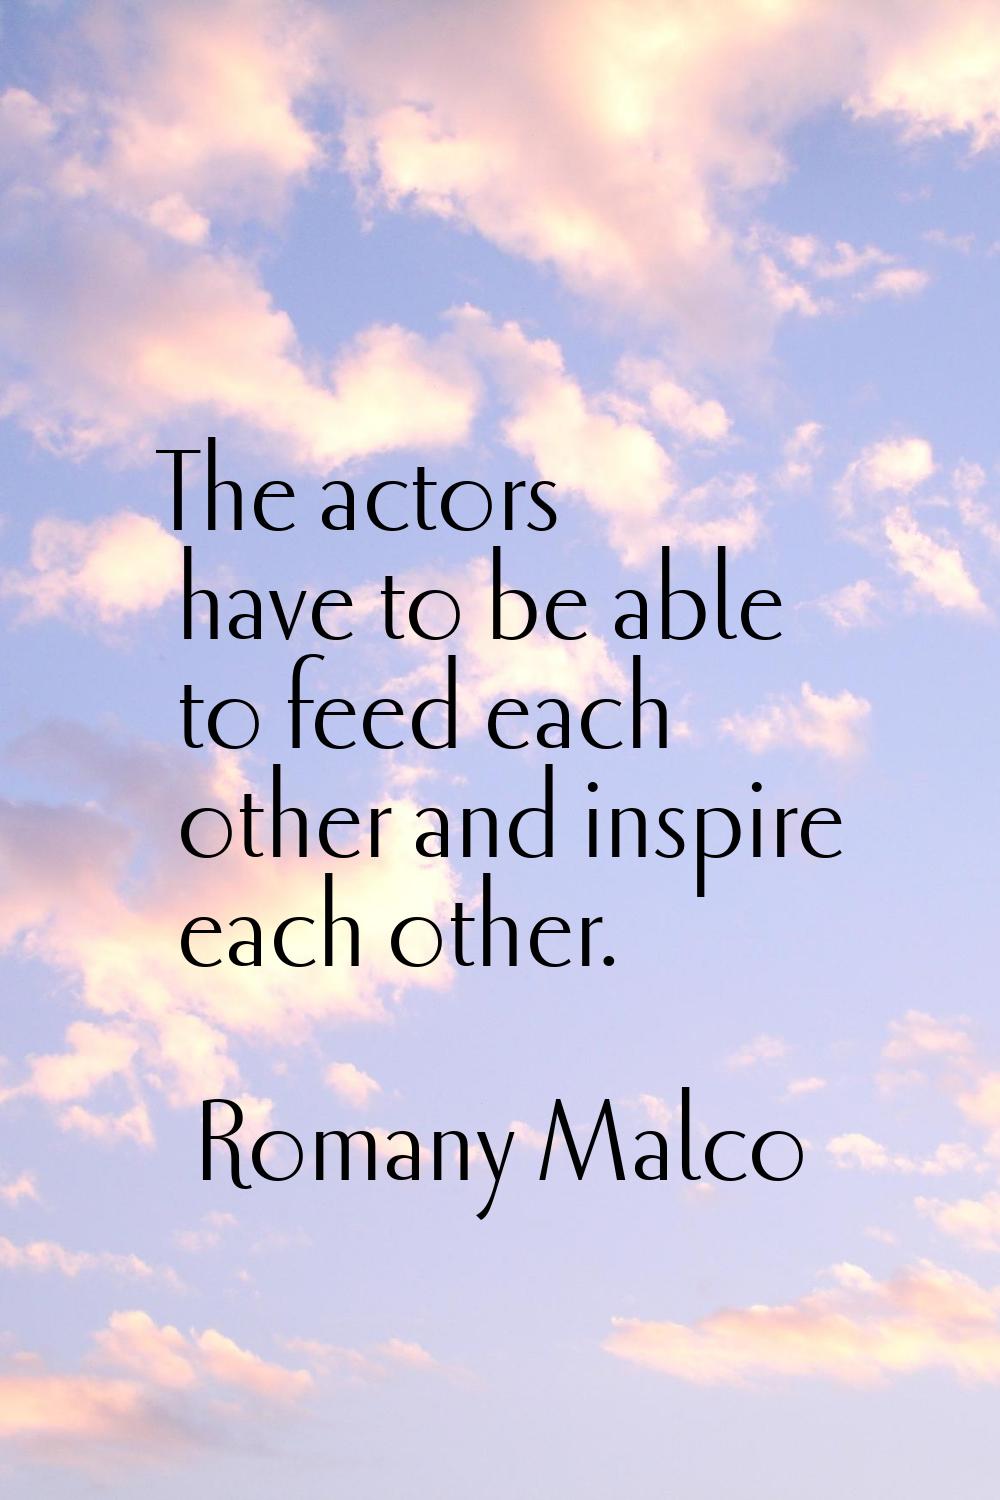 The actors have to be able to feed each other and inspire each other.